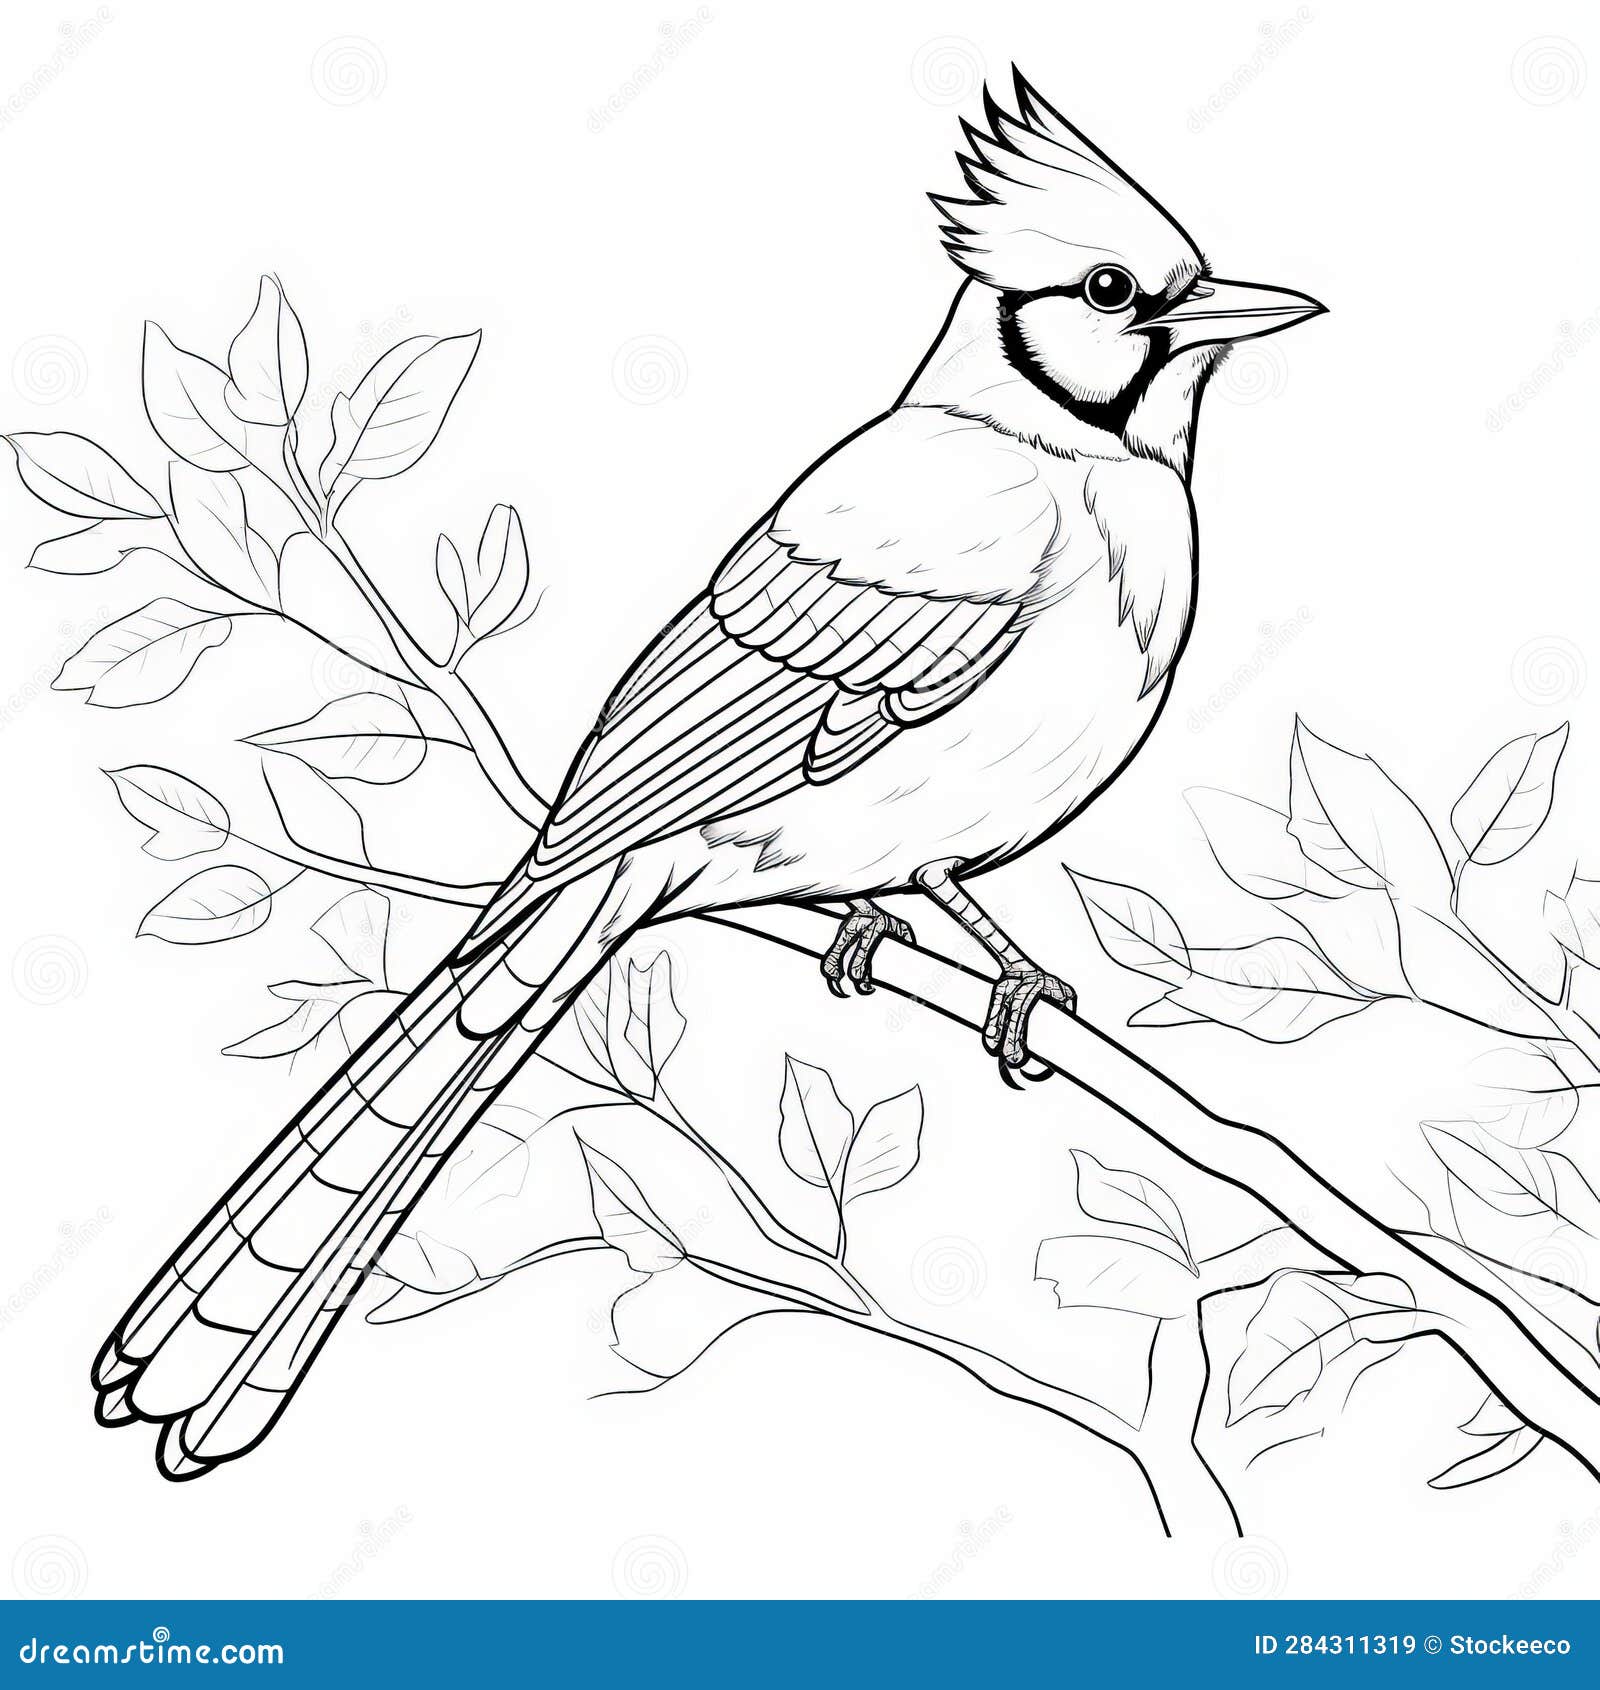 Realistic cardinal coloring page gray and blue cardinal on branch stock illustration